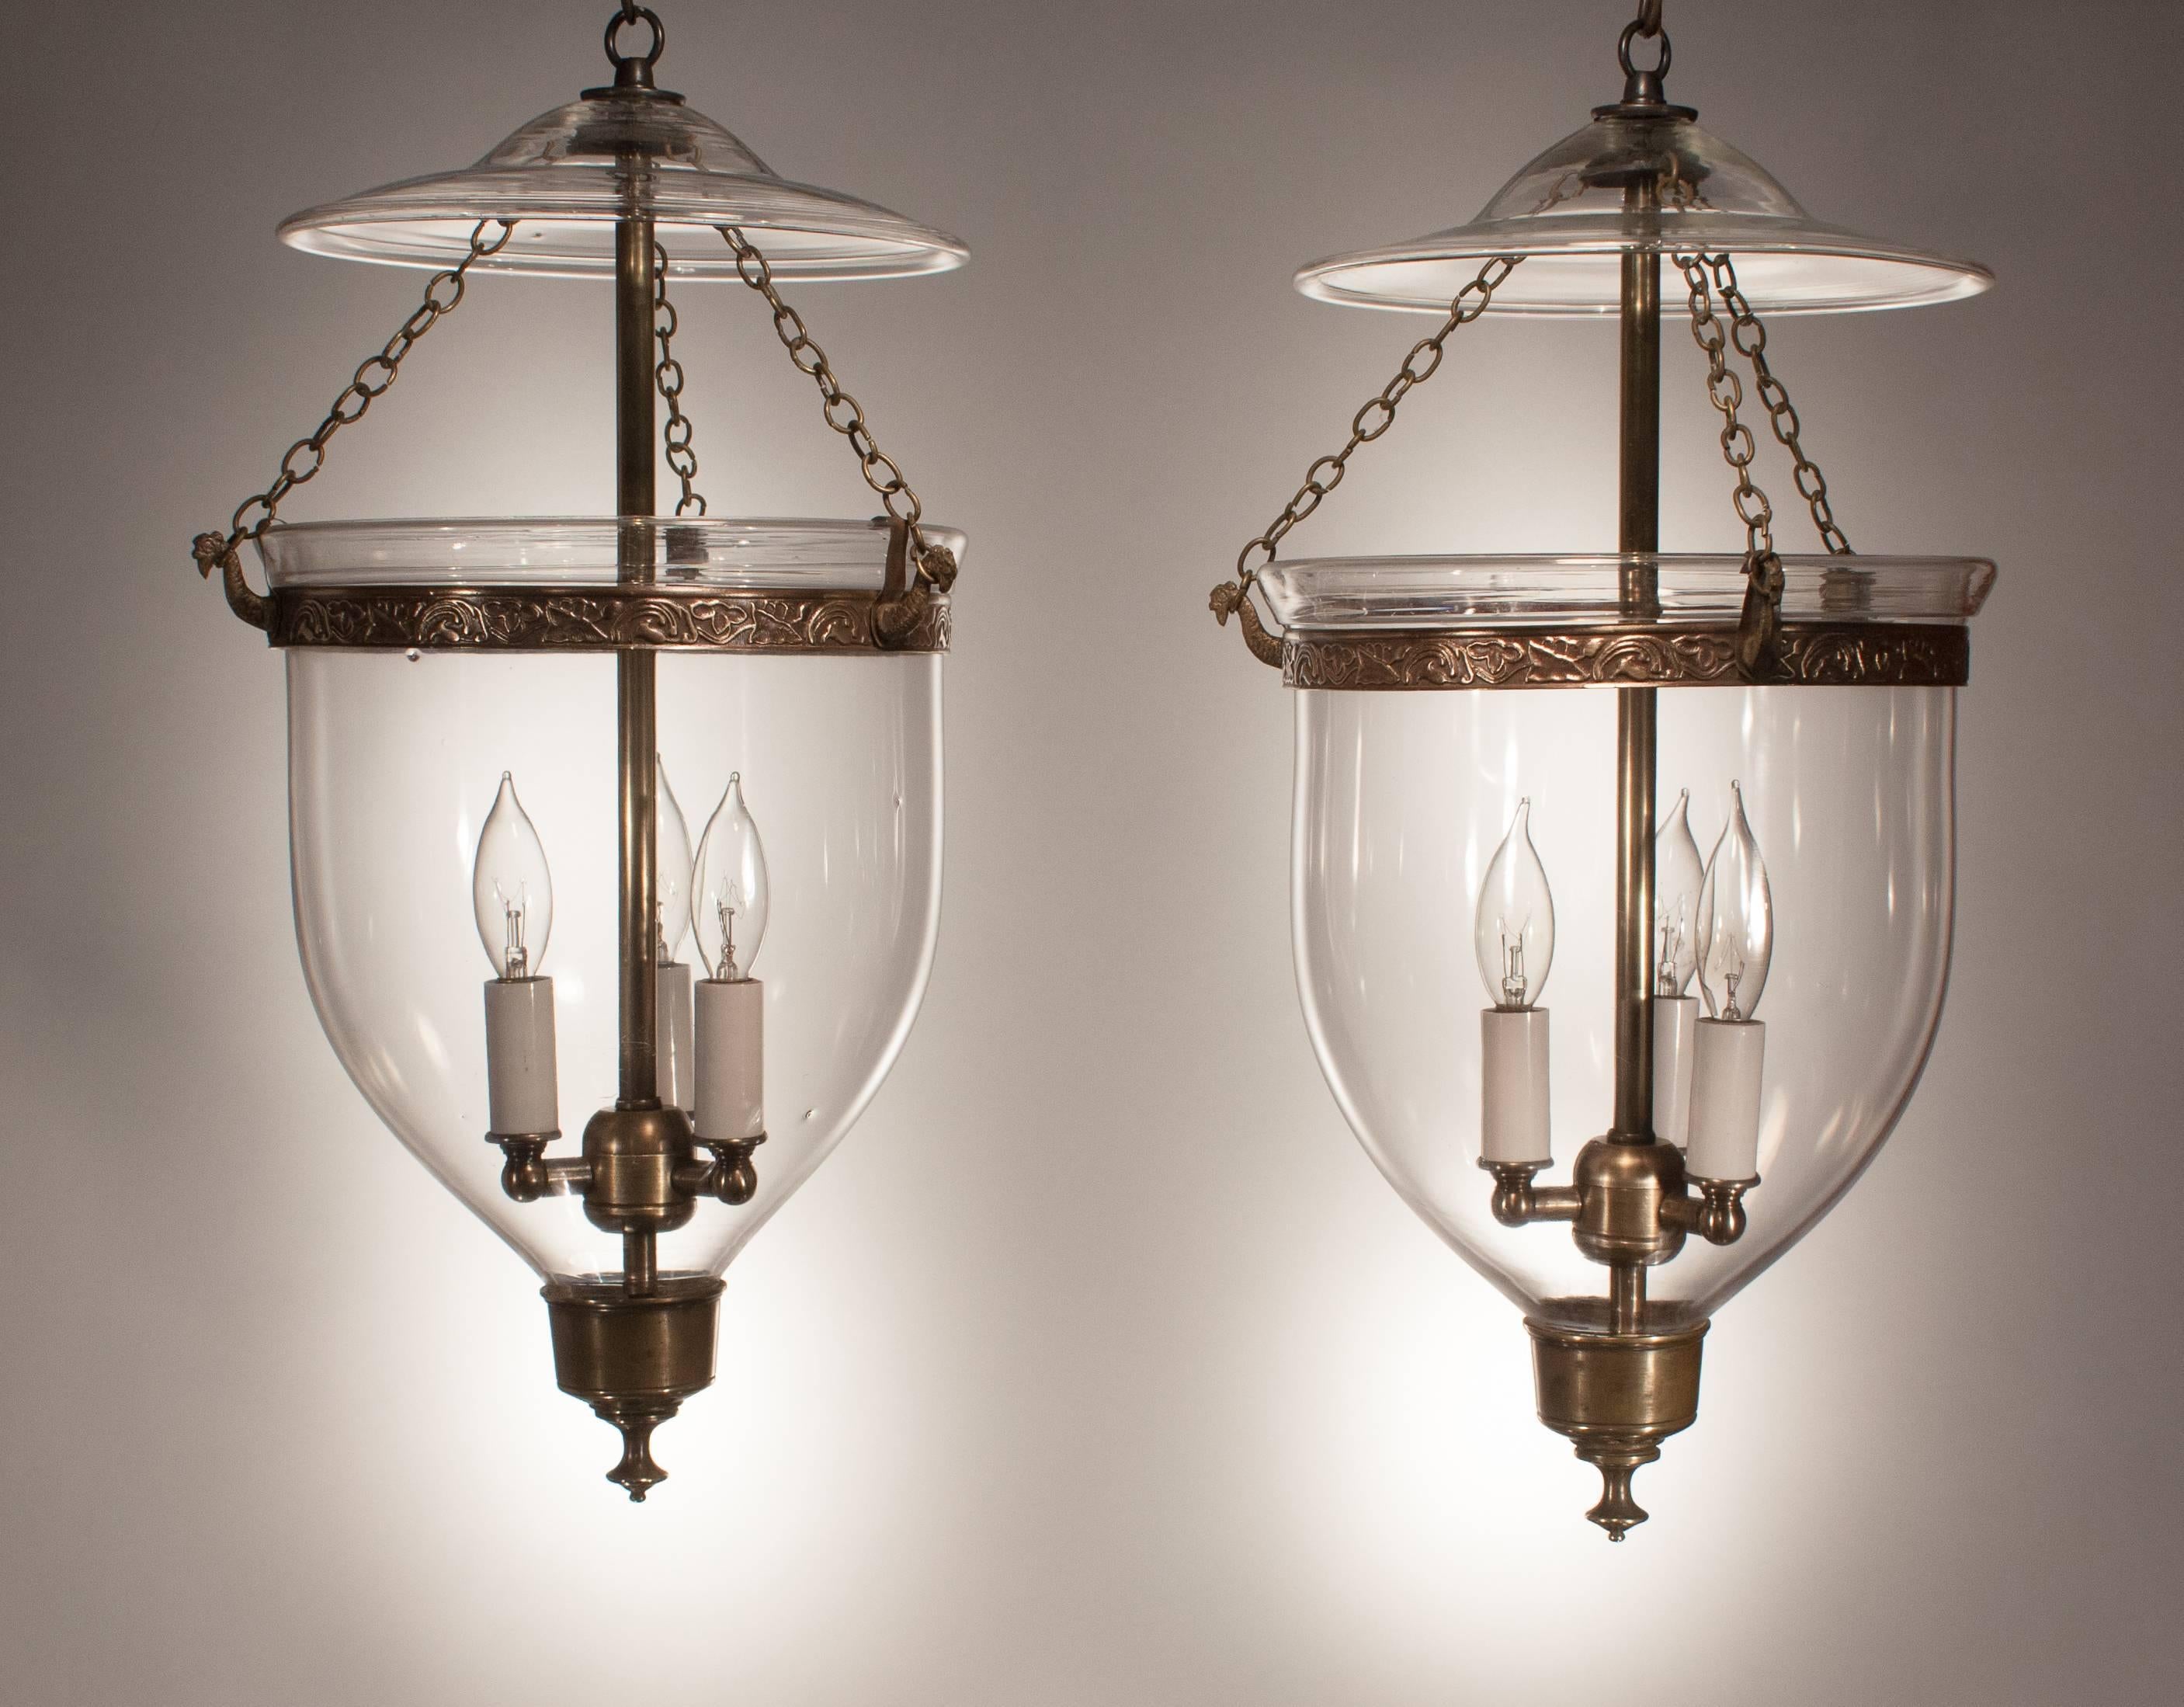 These especially lovely English bell jar lanterns, circa 1860, emanate light and character through their crystal clear handblown glass. The embossed brass bands (which have been replaced for stability) add just the right amount of ornamentation, and